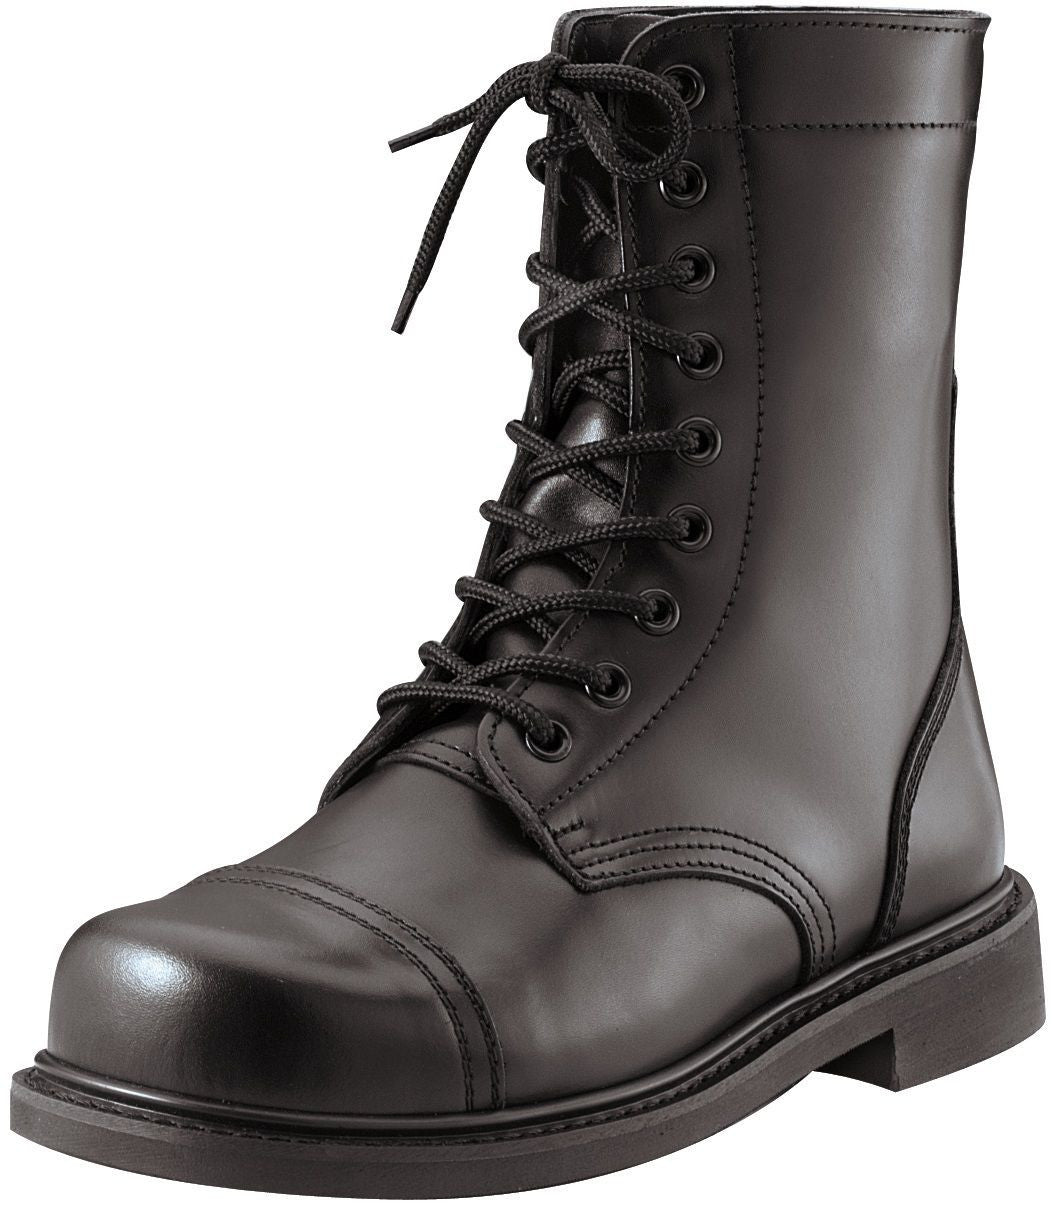 Mens Steel Toe GI Style Black Combat Boots / Boot Sizes 5-13